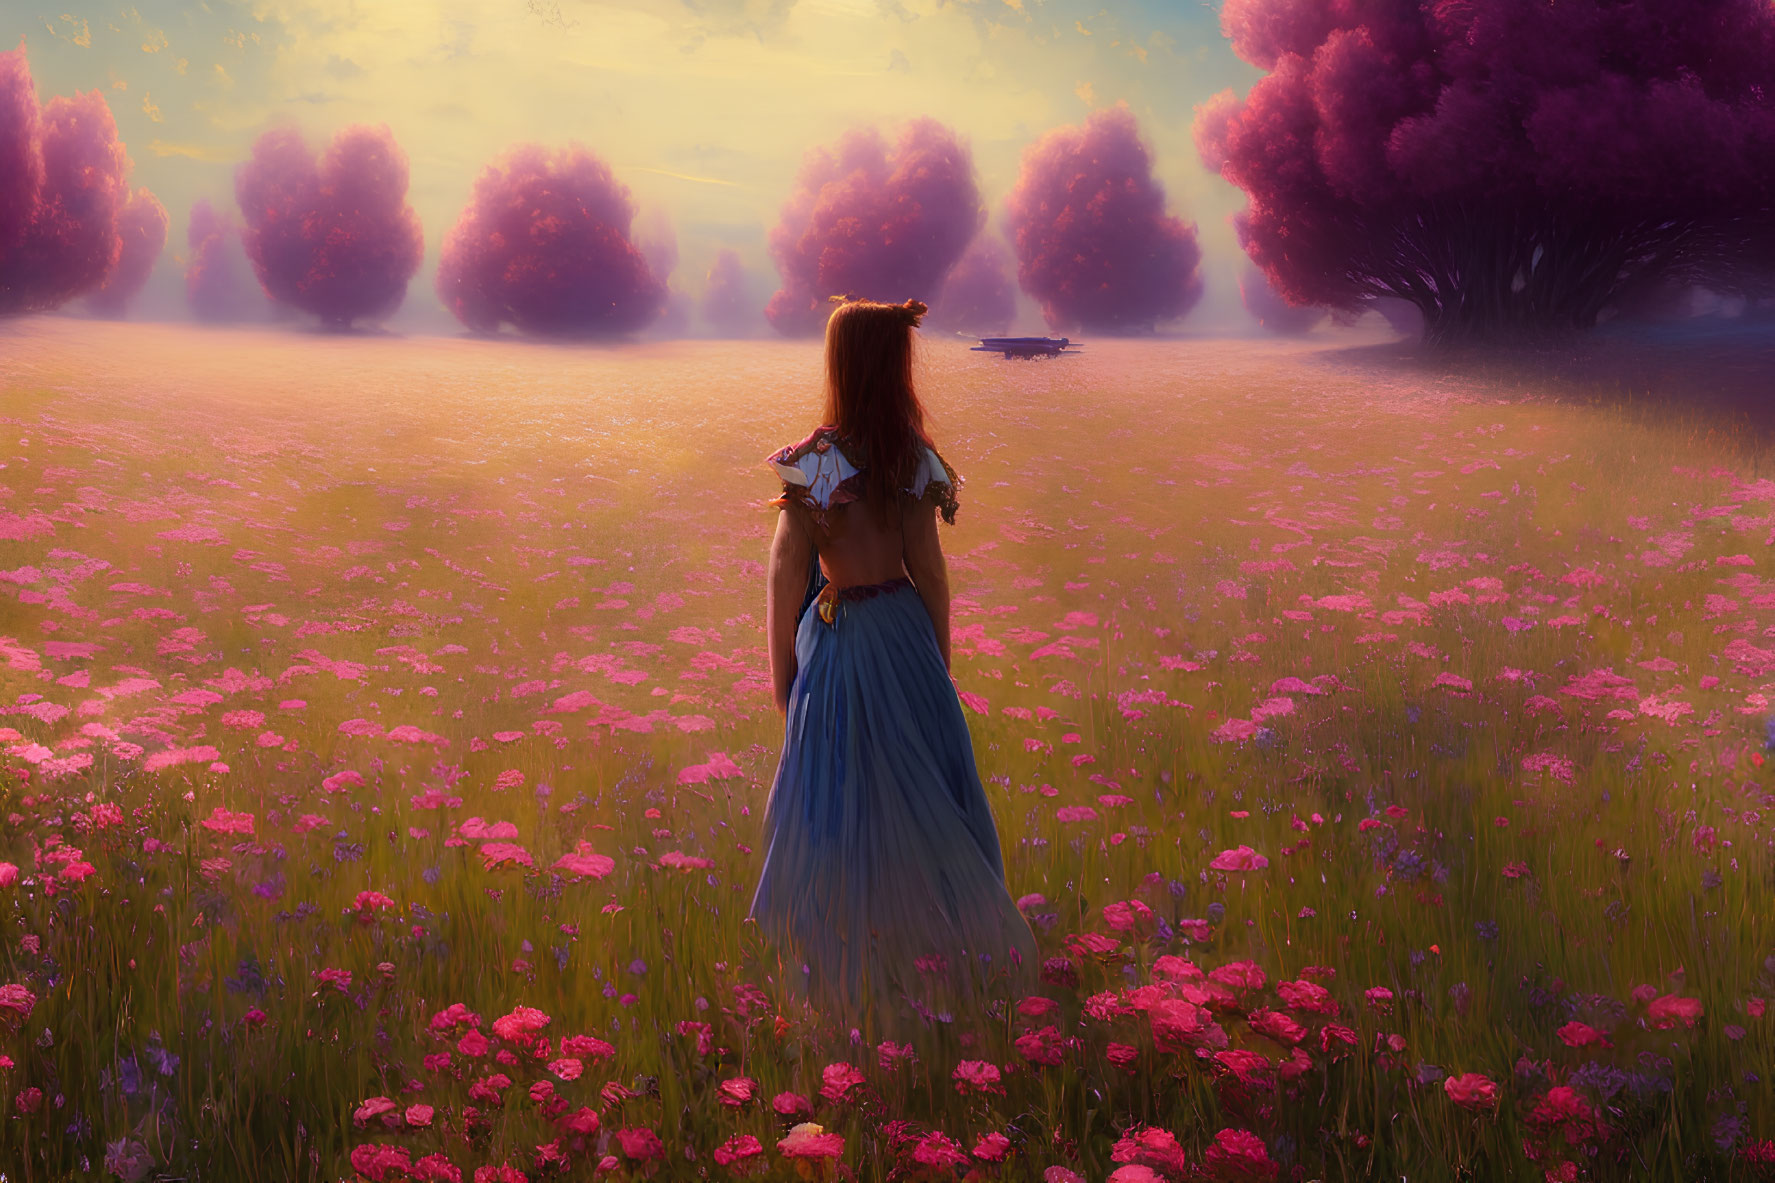 Woman in Blue Dress Surrounded by Pink Flowers and Purple Trees at Sunset